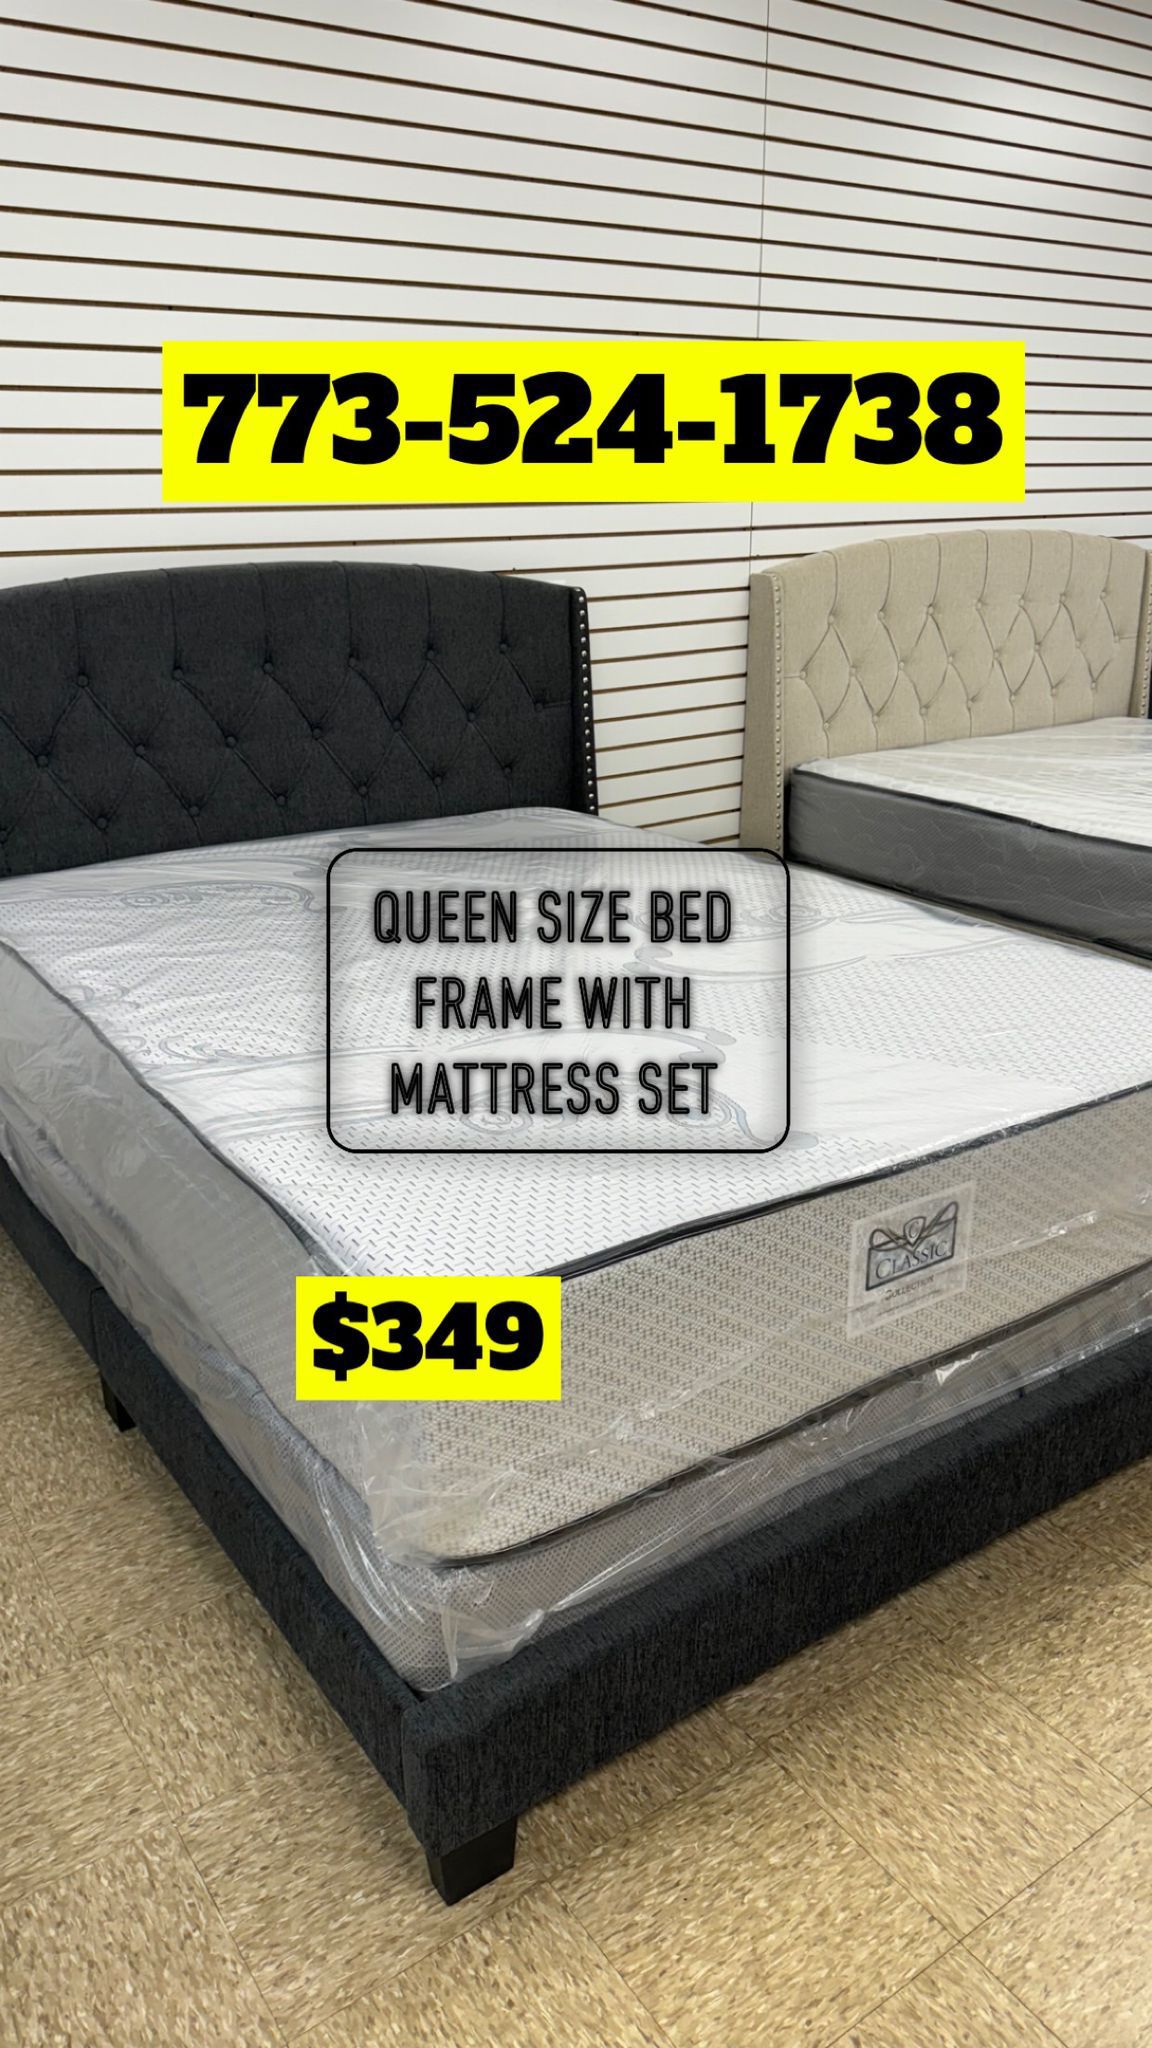 Queen Size Headboard Frame With Mattress And Box Spring $350 Only 